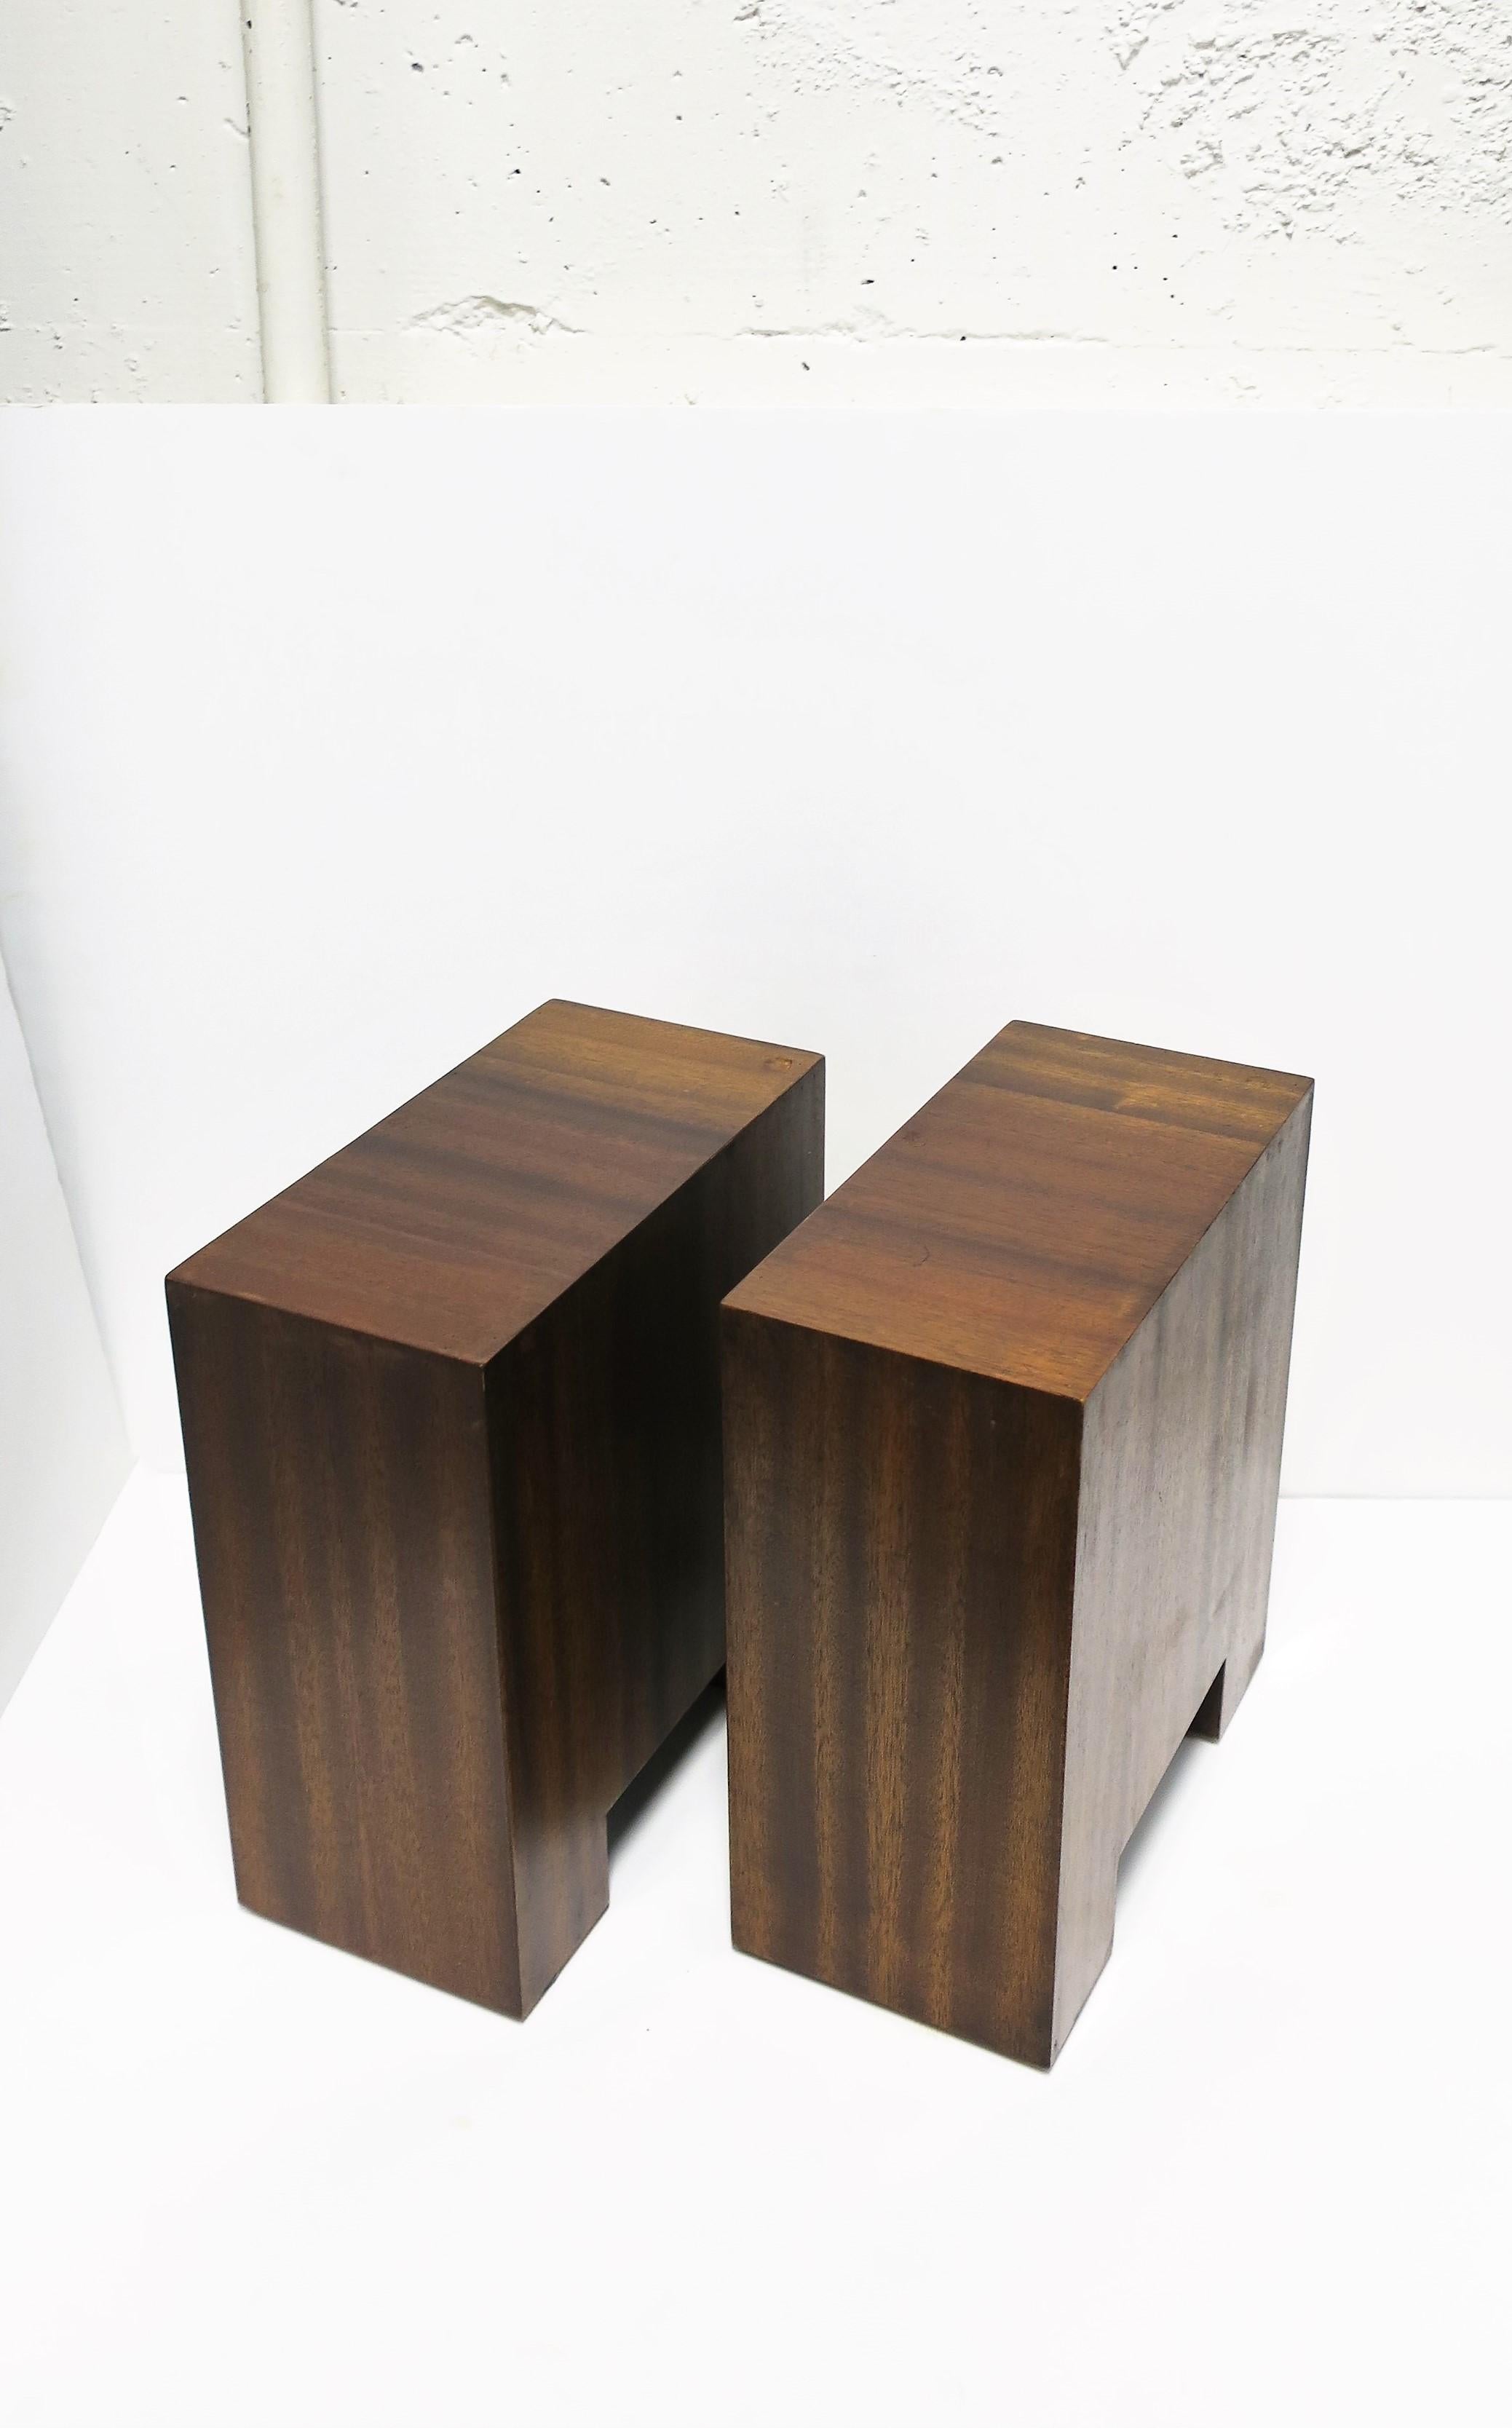 A pair of Minimalist brown wood end or side/drinks tables, circa late 20th to early 21st century. Tables are rectangular and a convenient size. Dimensions: 6